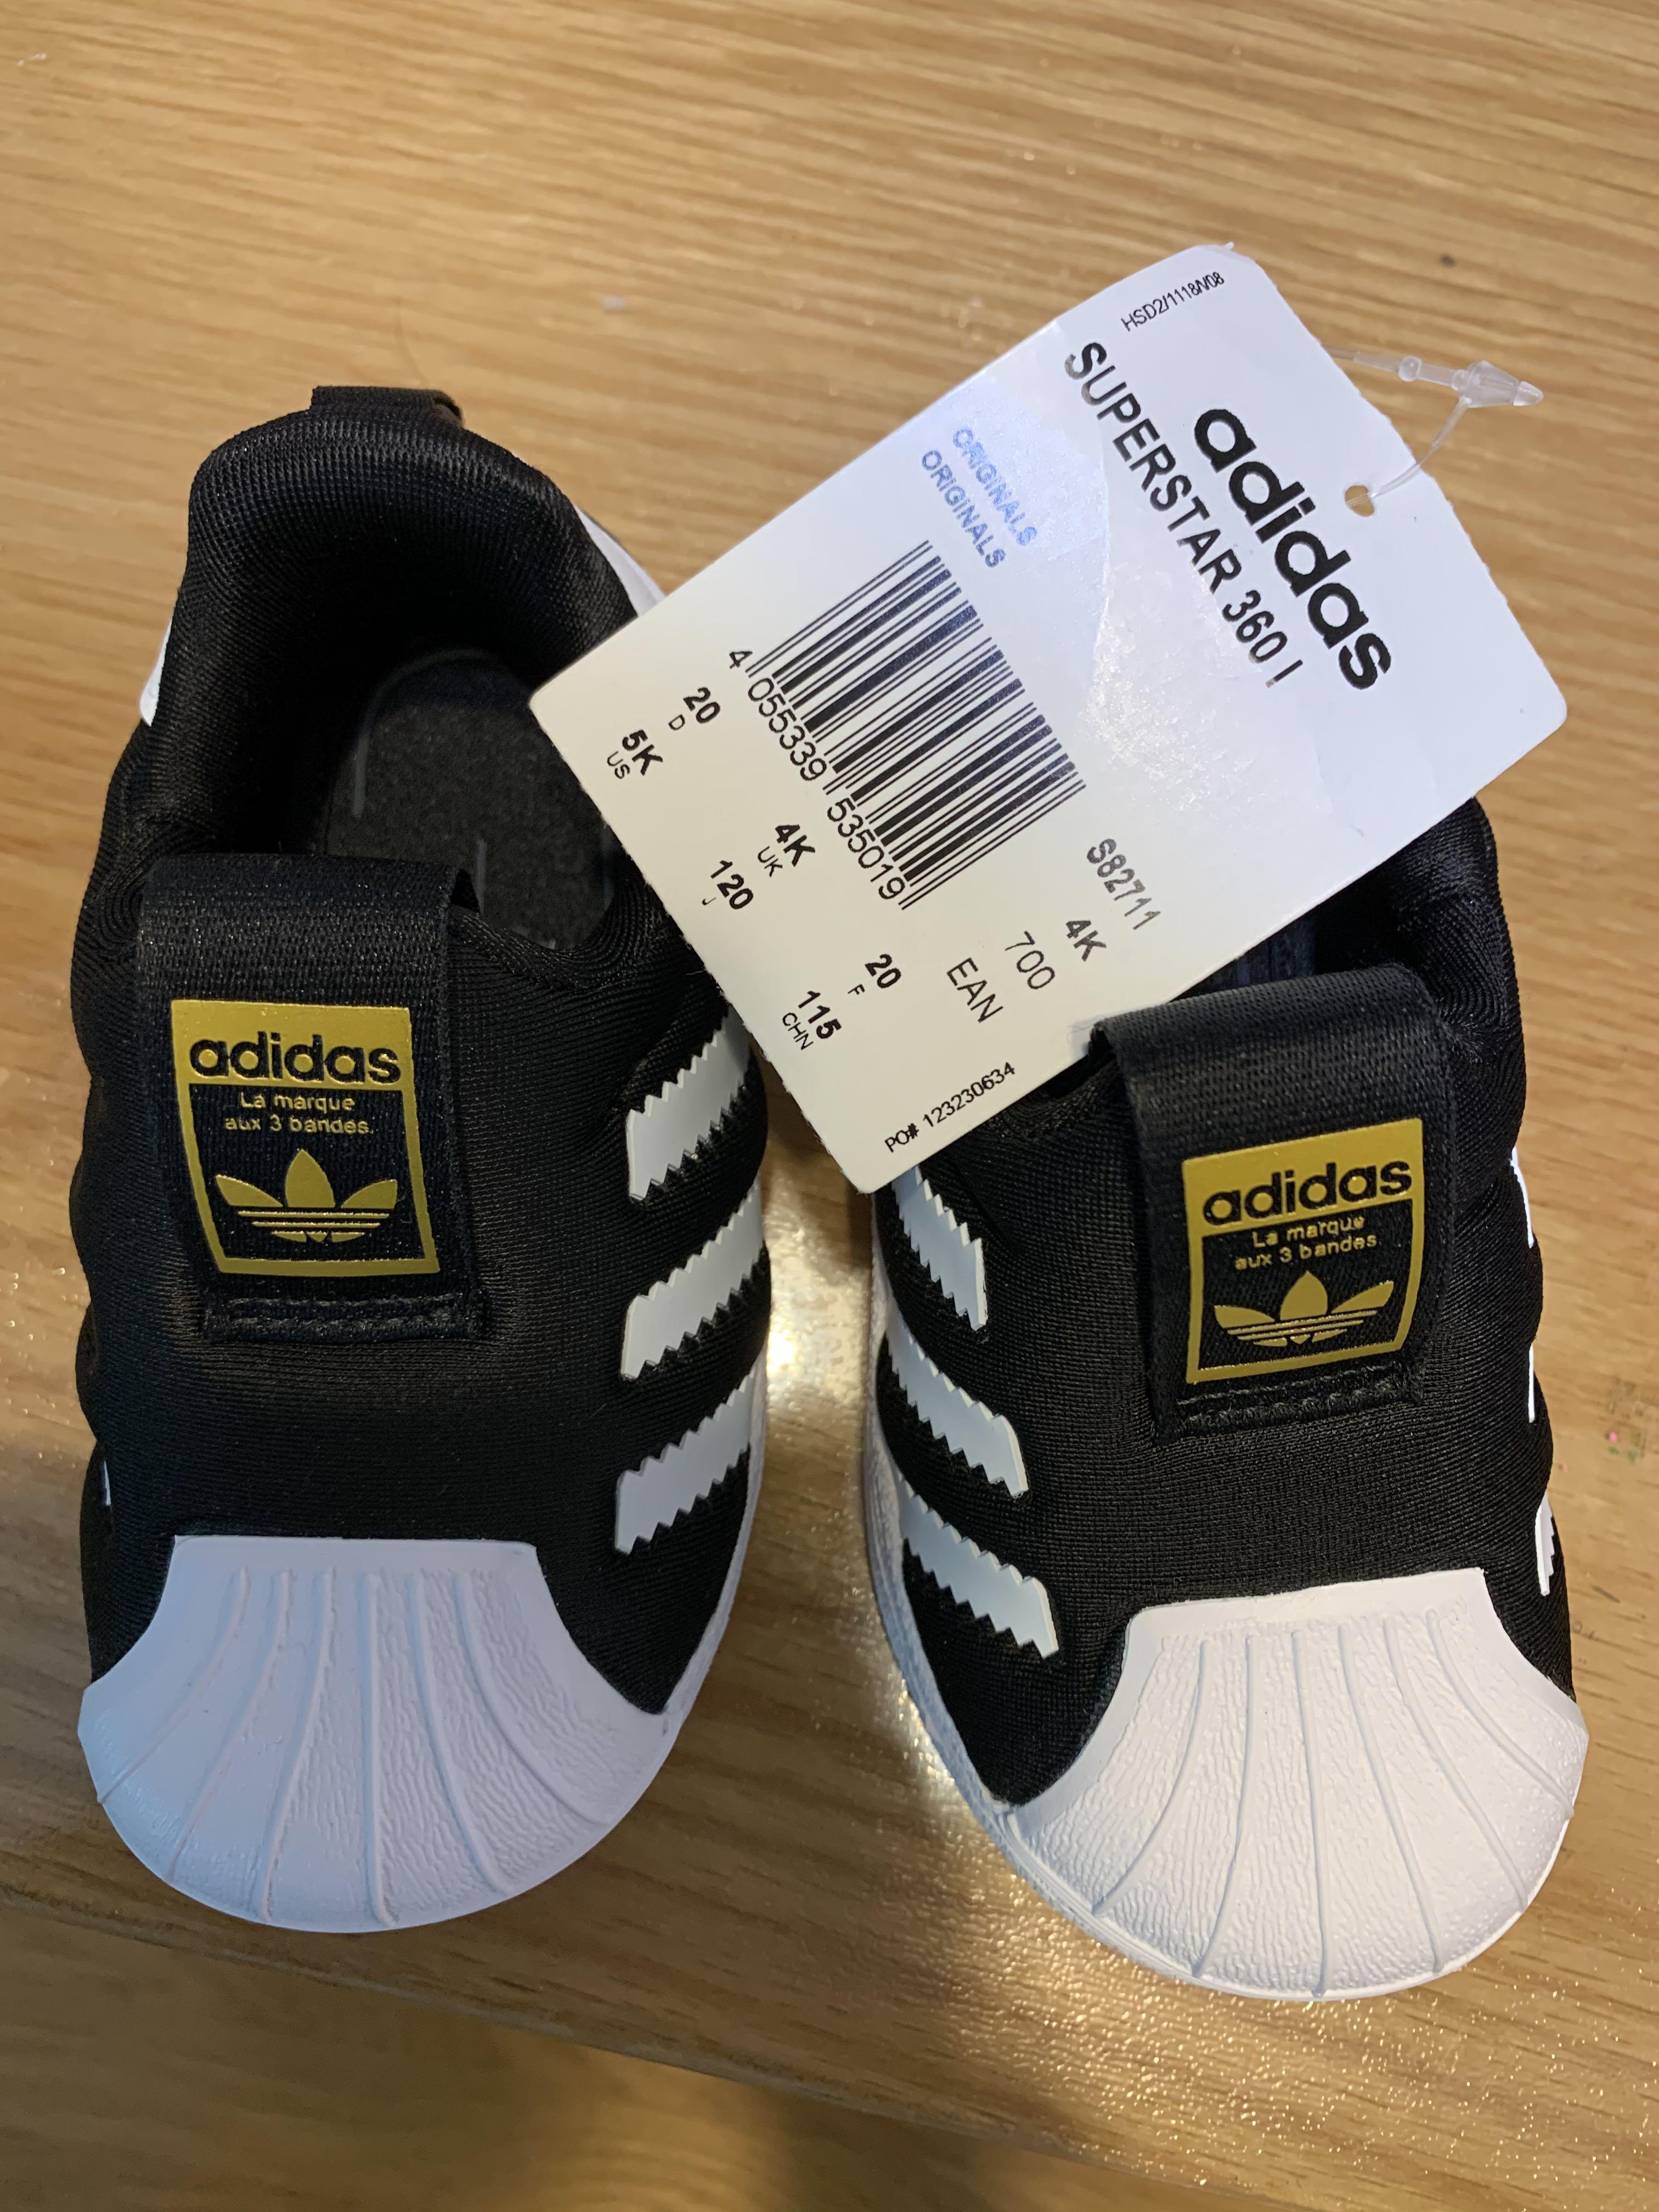 adidas 1 year old buy clothes shoes online